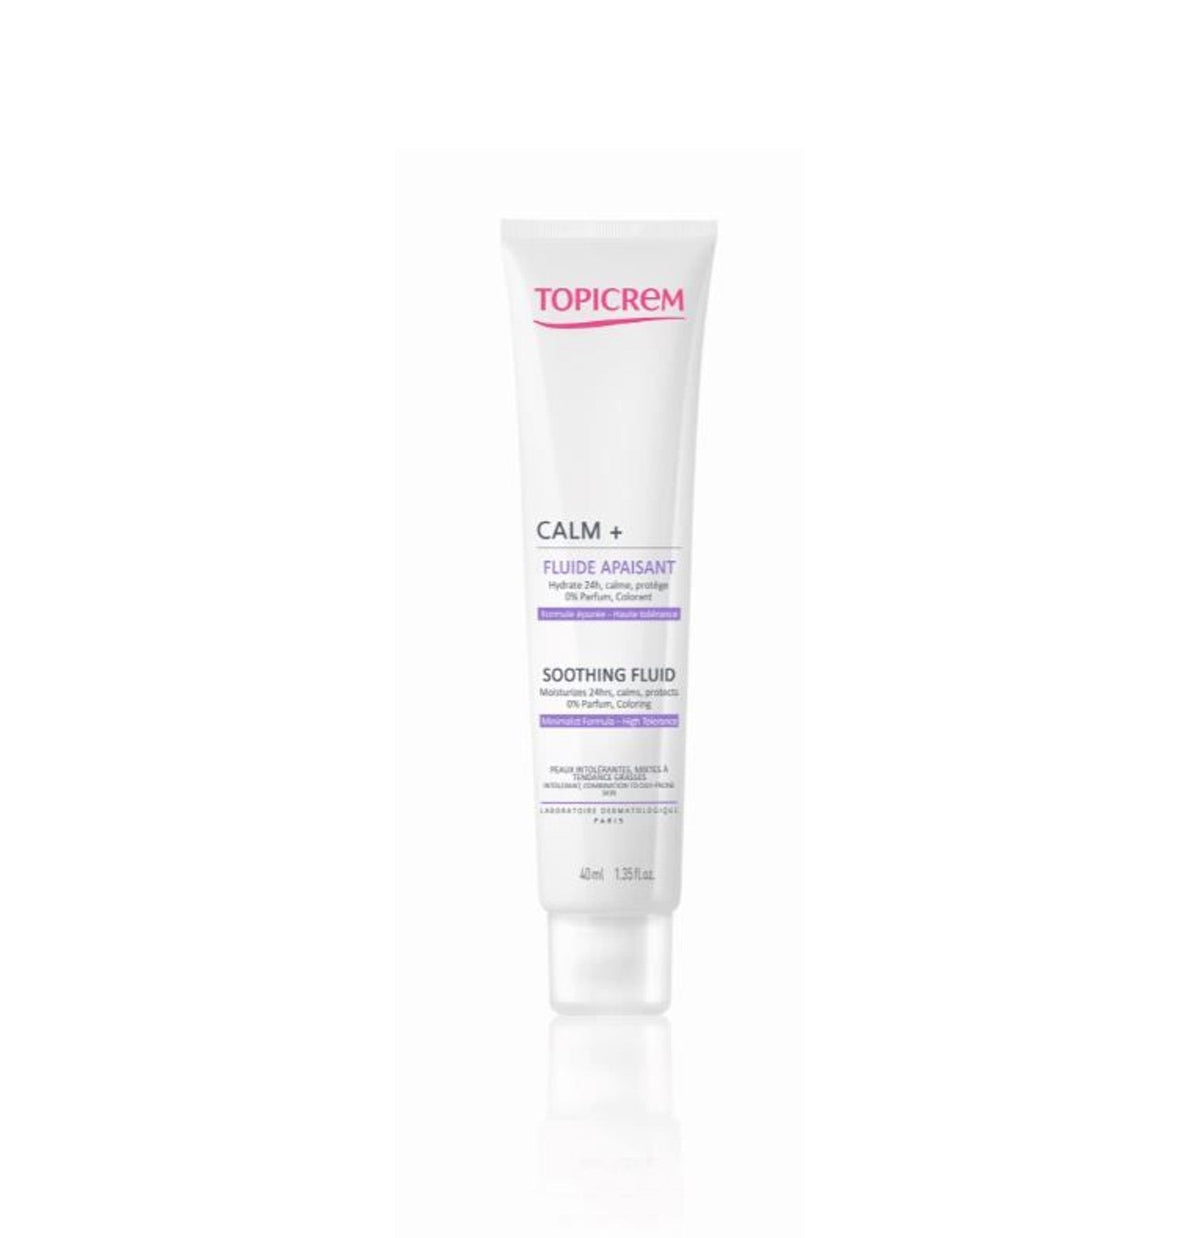 Topicrem CALM+ Soothing Fluid 40ml | Goods Department Store